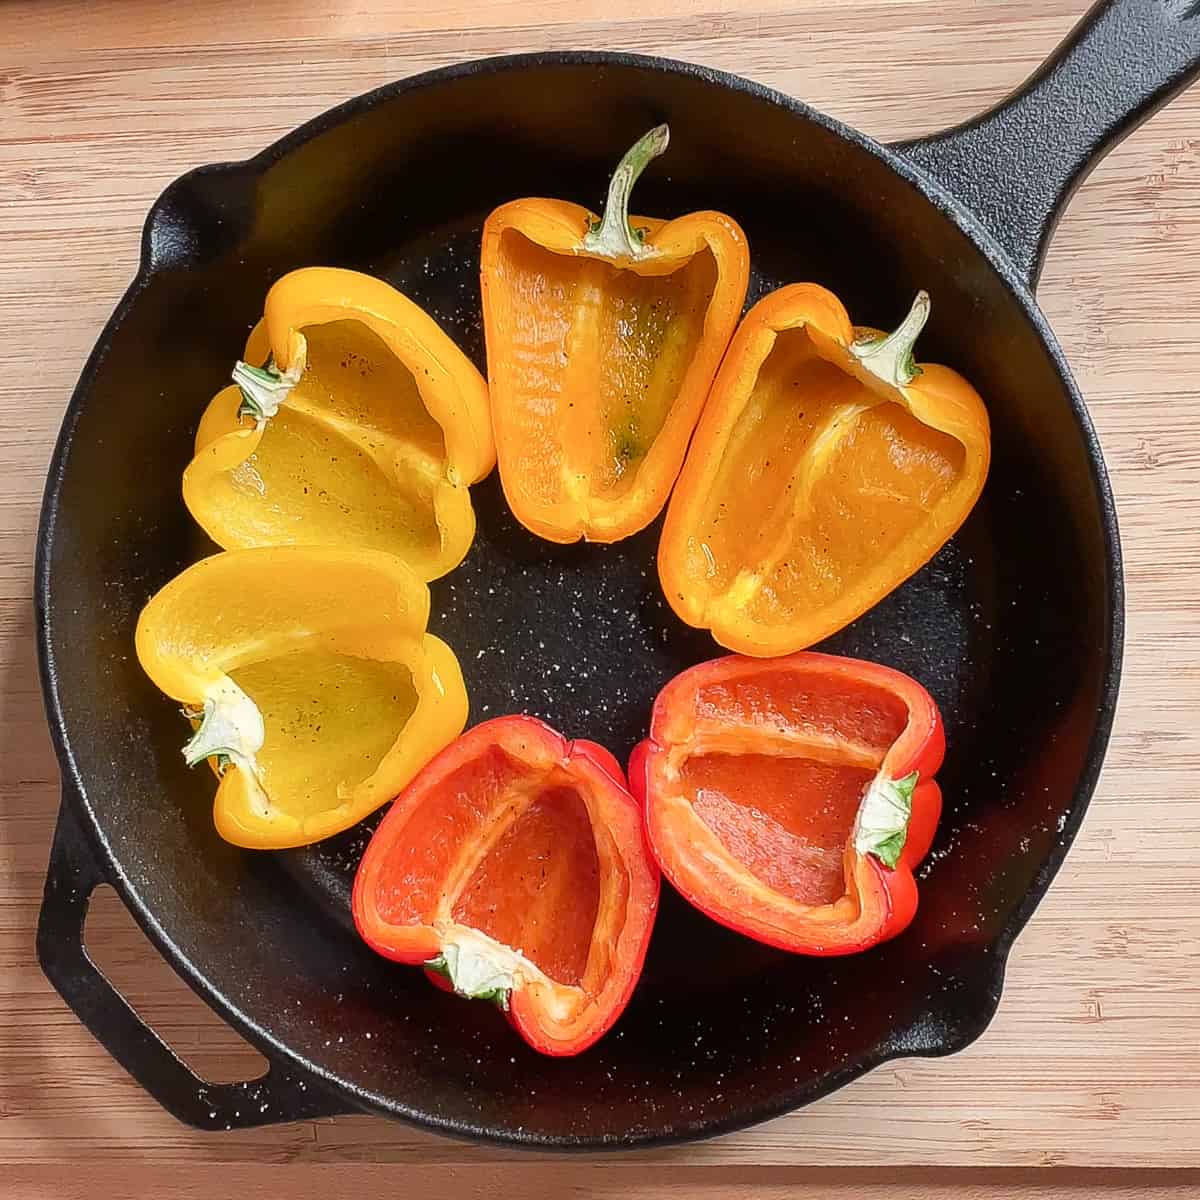 6 pepper halves sitting cut side up in a cast iron skillet.